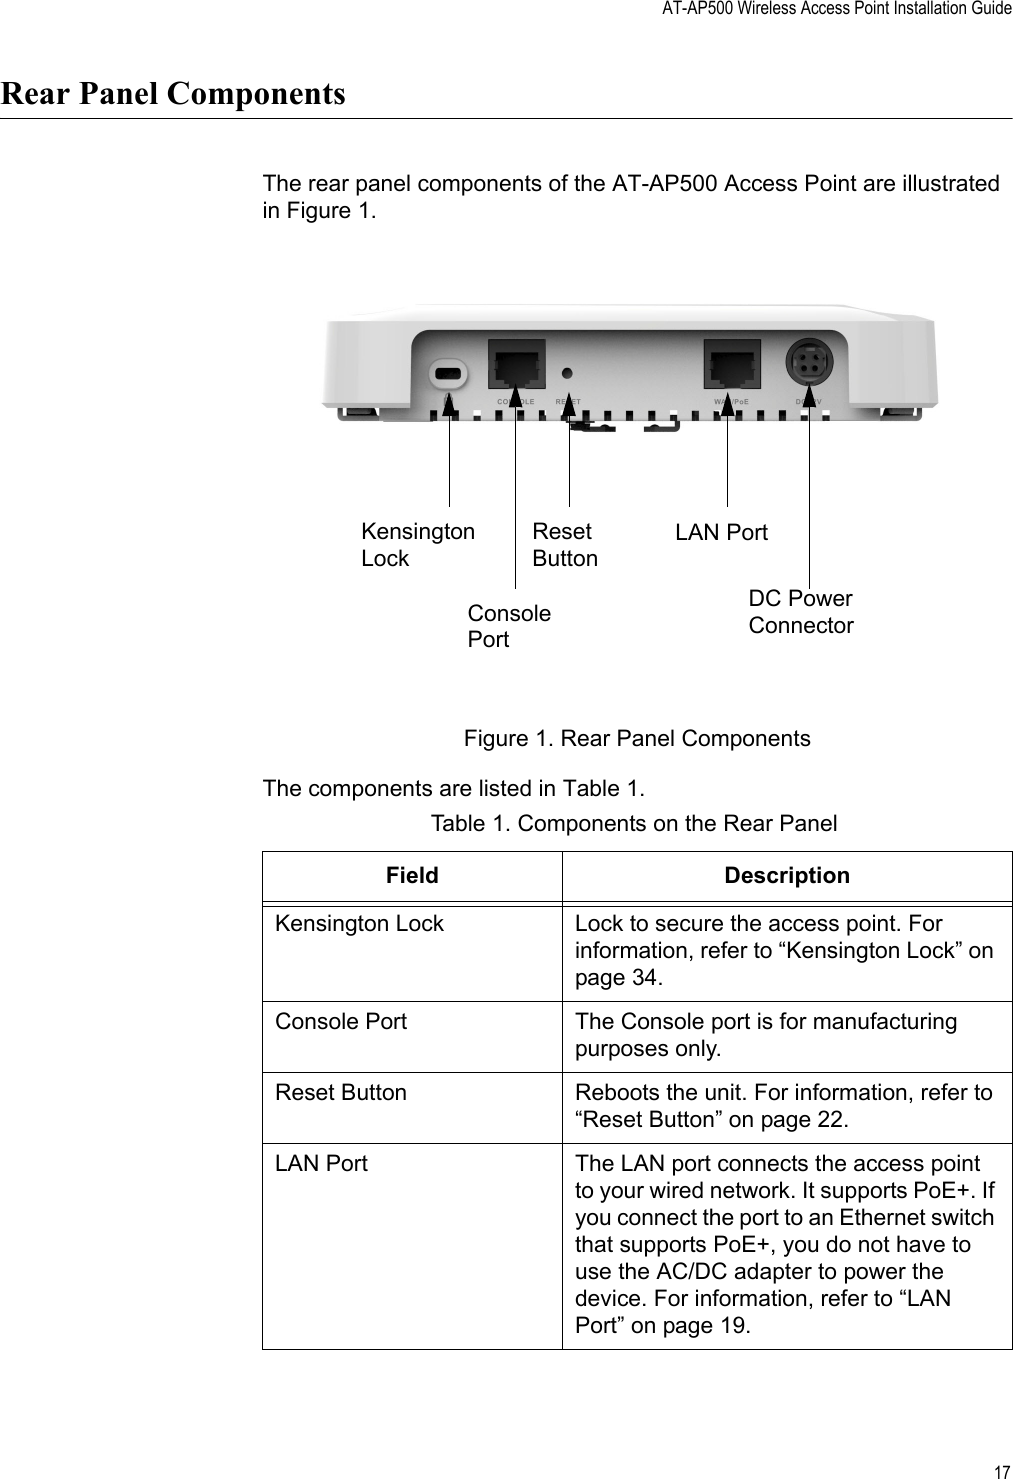 AT-AP500 Wireless Access Point Installation Guide17Rear Panel ComponentsThe rear panel components of the AT-AP500 Access Point are illustrated in Figure 1.Figure 1. Rear Panel ComponentsThe components are listed in Table 1.Table 1. Components on the Rear PanelField DescriptionKensington Lock Lock to secure the access point. For information, refer to “Kensington Lock” on page 34.Console Port The Console port is for manufacturing purposes only.Reset Button Reboots the unit. For information, refer to “Reset Button” on page 22.LAN Port The LAN port connects the access point to your wired network. It supports PoE+. If you connect the port to an Ethernet switch that supports PoE+, you do not have to use the AC/DC adapter to power the device. For information, refer to “LAN Port” on page 19.Reset ButtonConsole PortKensington LockDC Power ConnectorLAN Port Review Draft 2-1-16